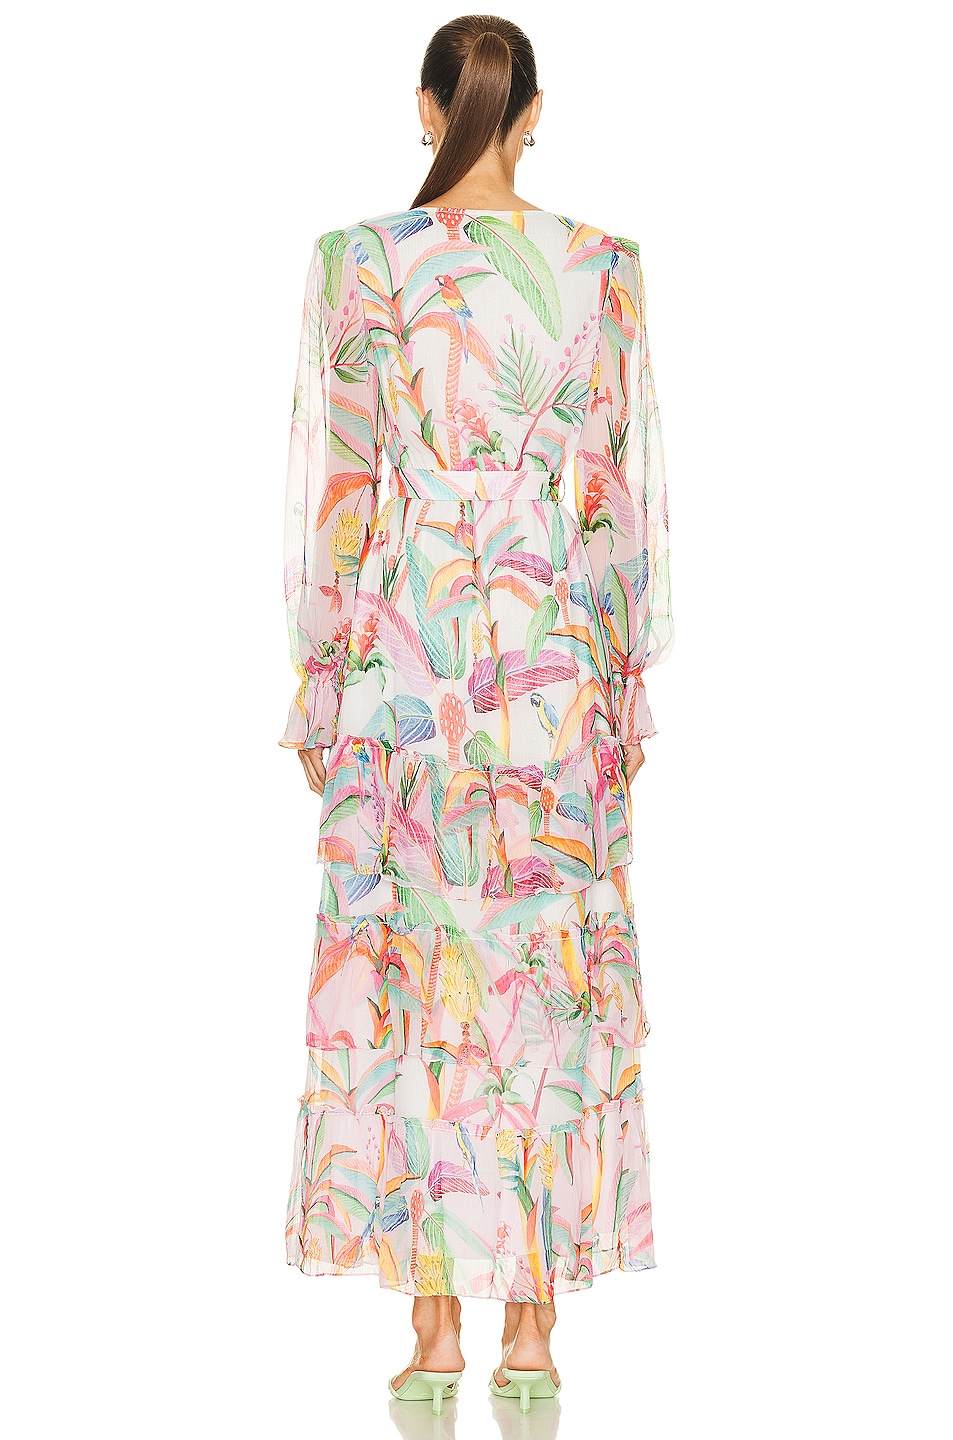 ROCOCO SAND Rio Long Dress with Belt in Multi Tropical | FWRD